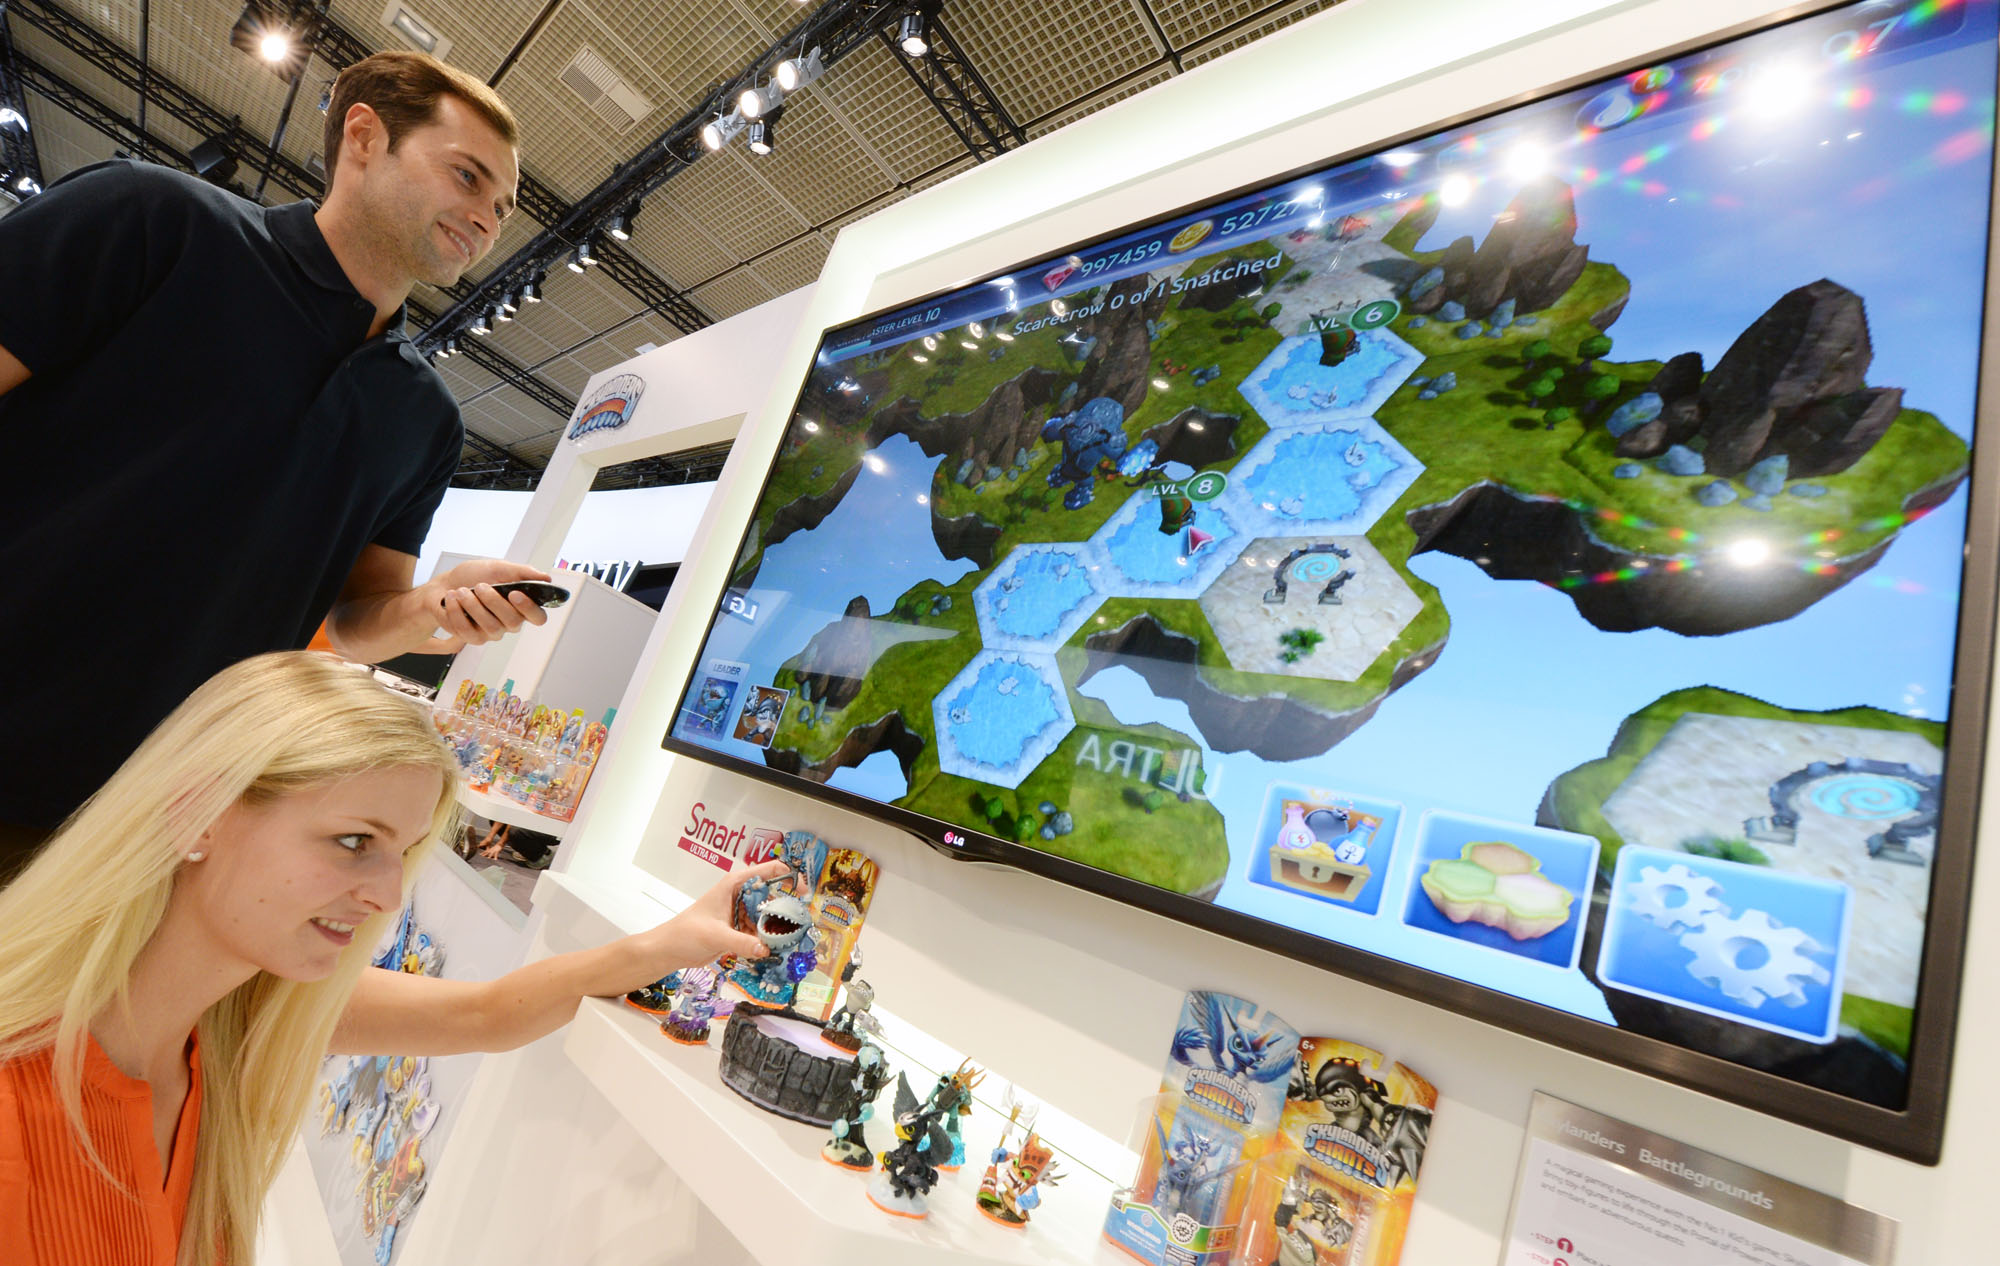 Visitors to the LG booth at IFA 2013 play popular family-friendly video game ‘Skylanders Battlegrounds®’ with the LG CINEMA 3D Smart TV